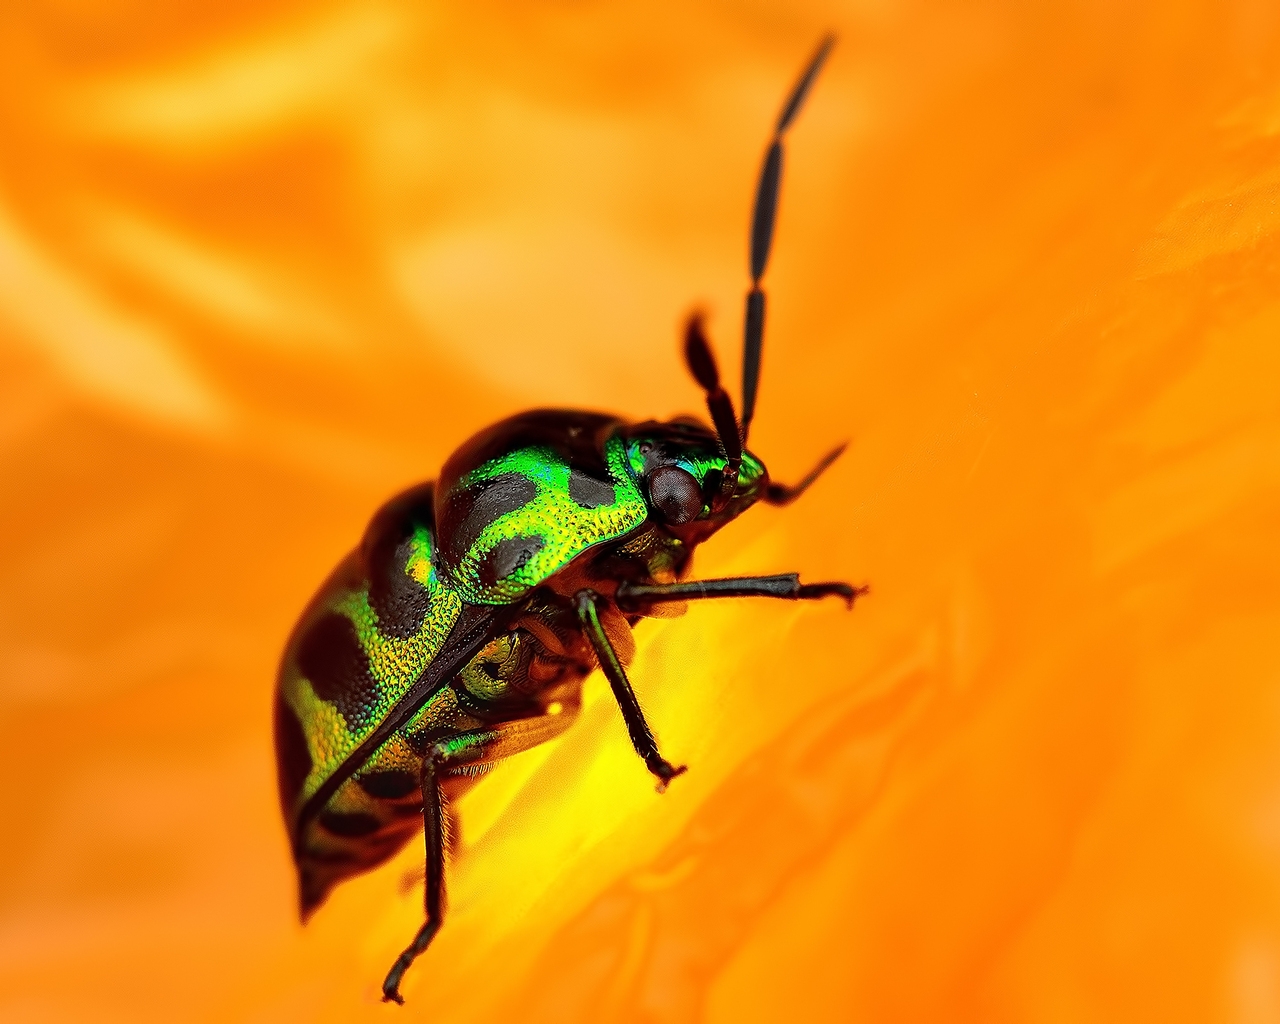 Green Beetle for 1280 x 1024 resolution